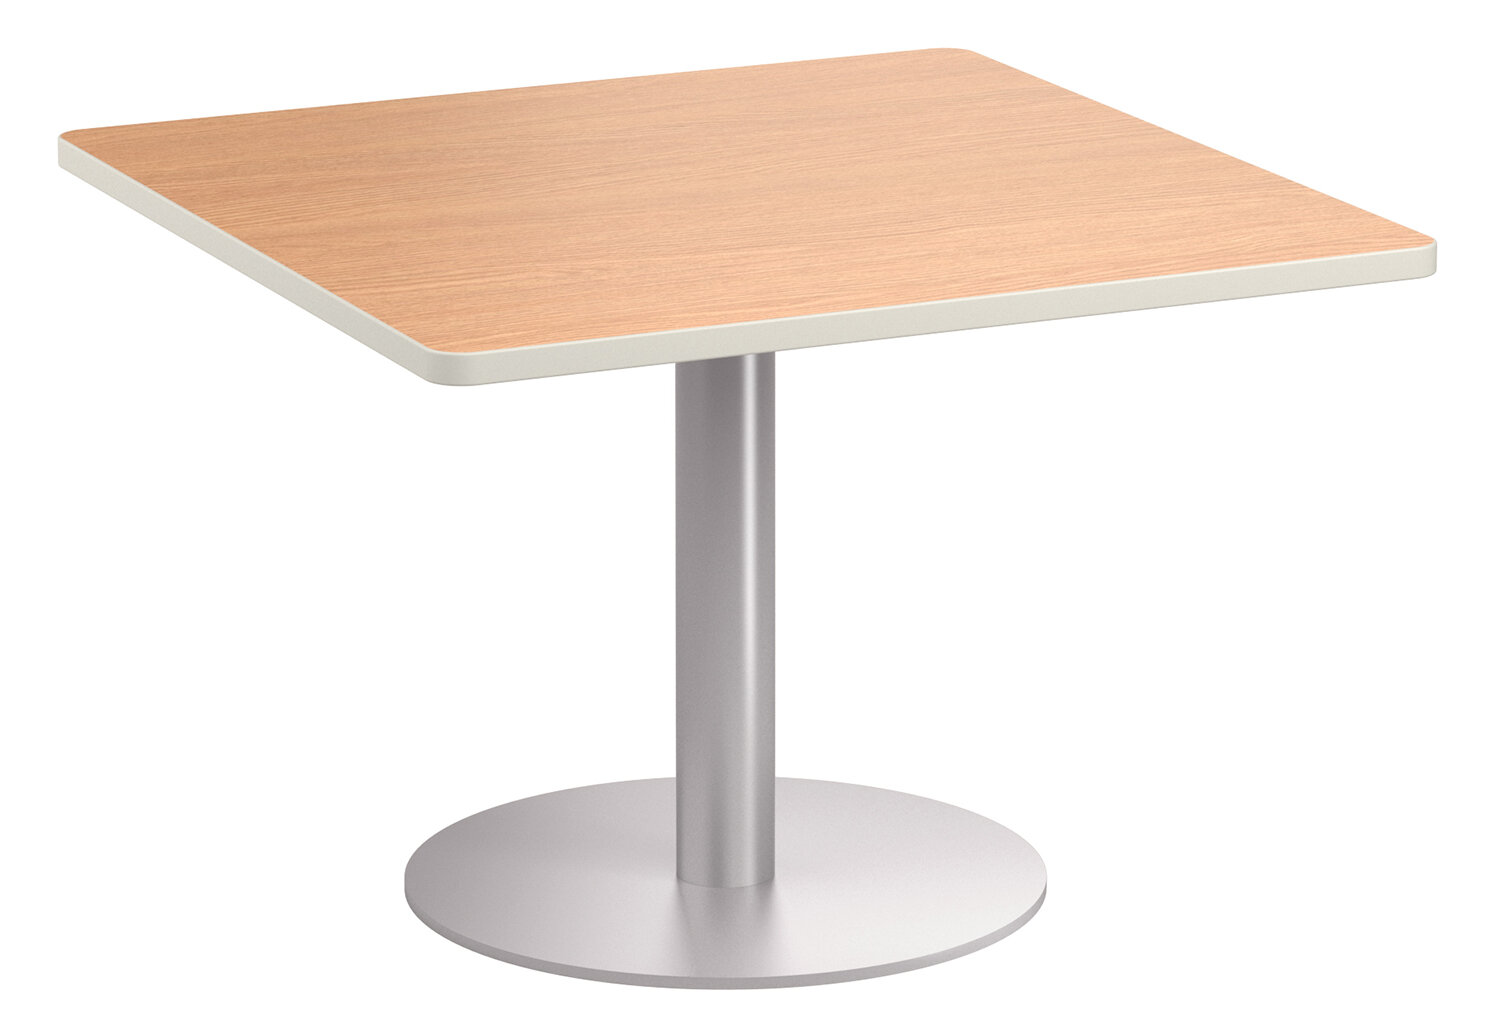 42-square-cafe-table.jpg